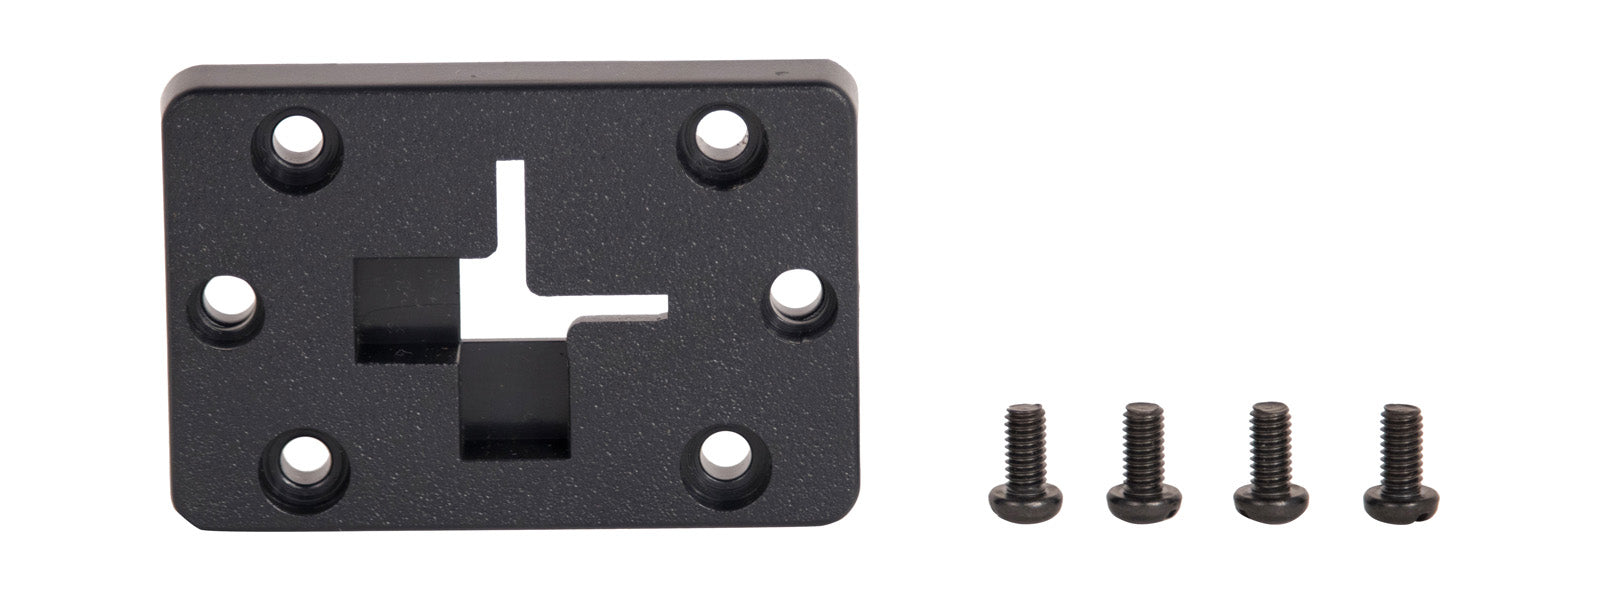 SiriusXM Satellite Radio AMPs T-Notch Adapter Plate with Screws